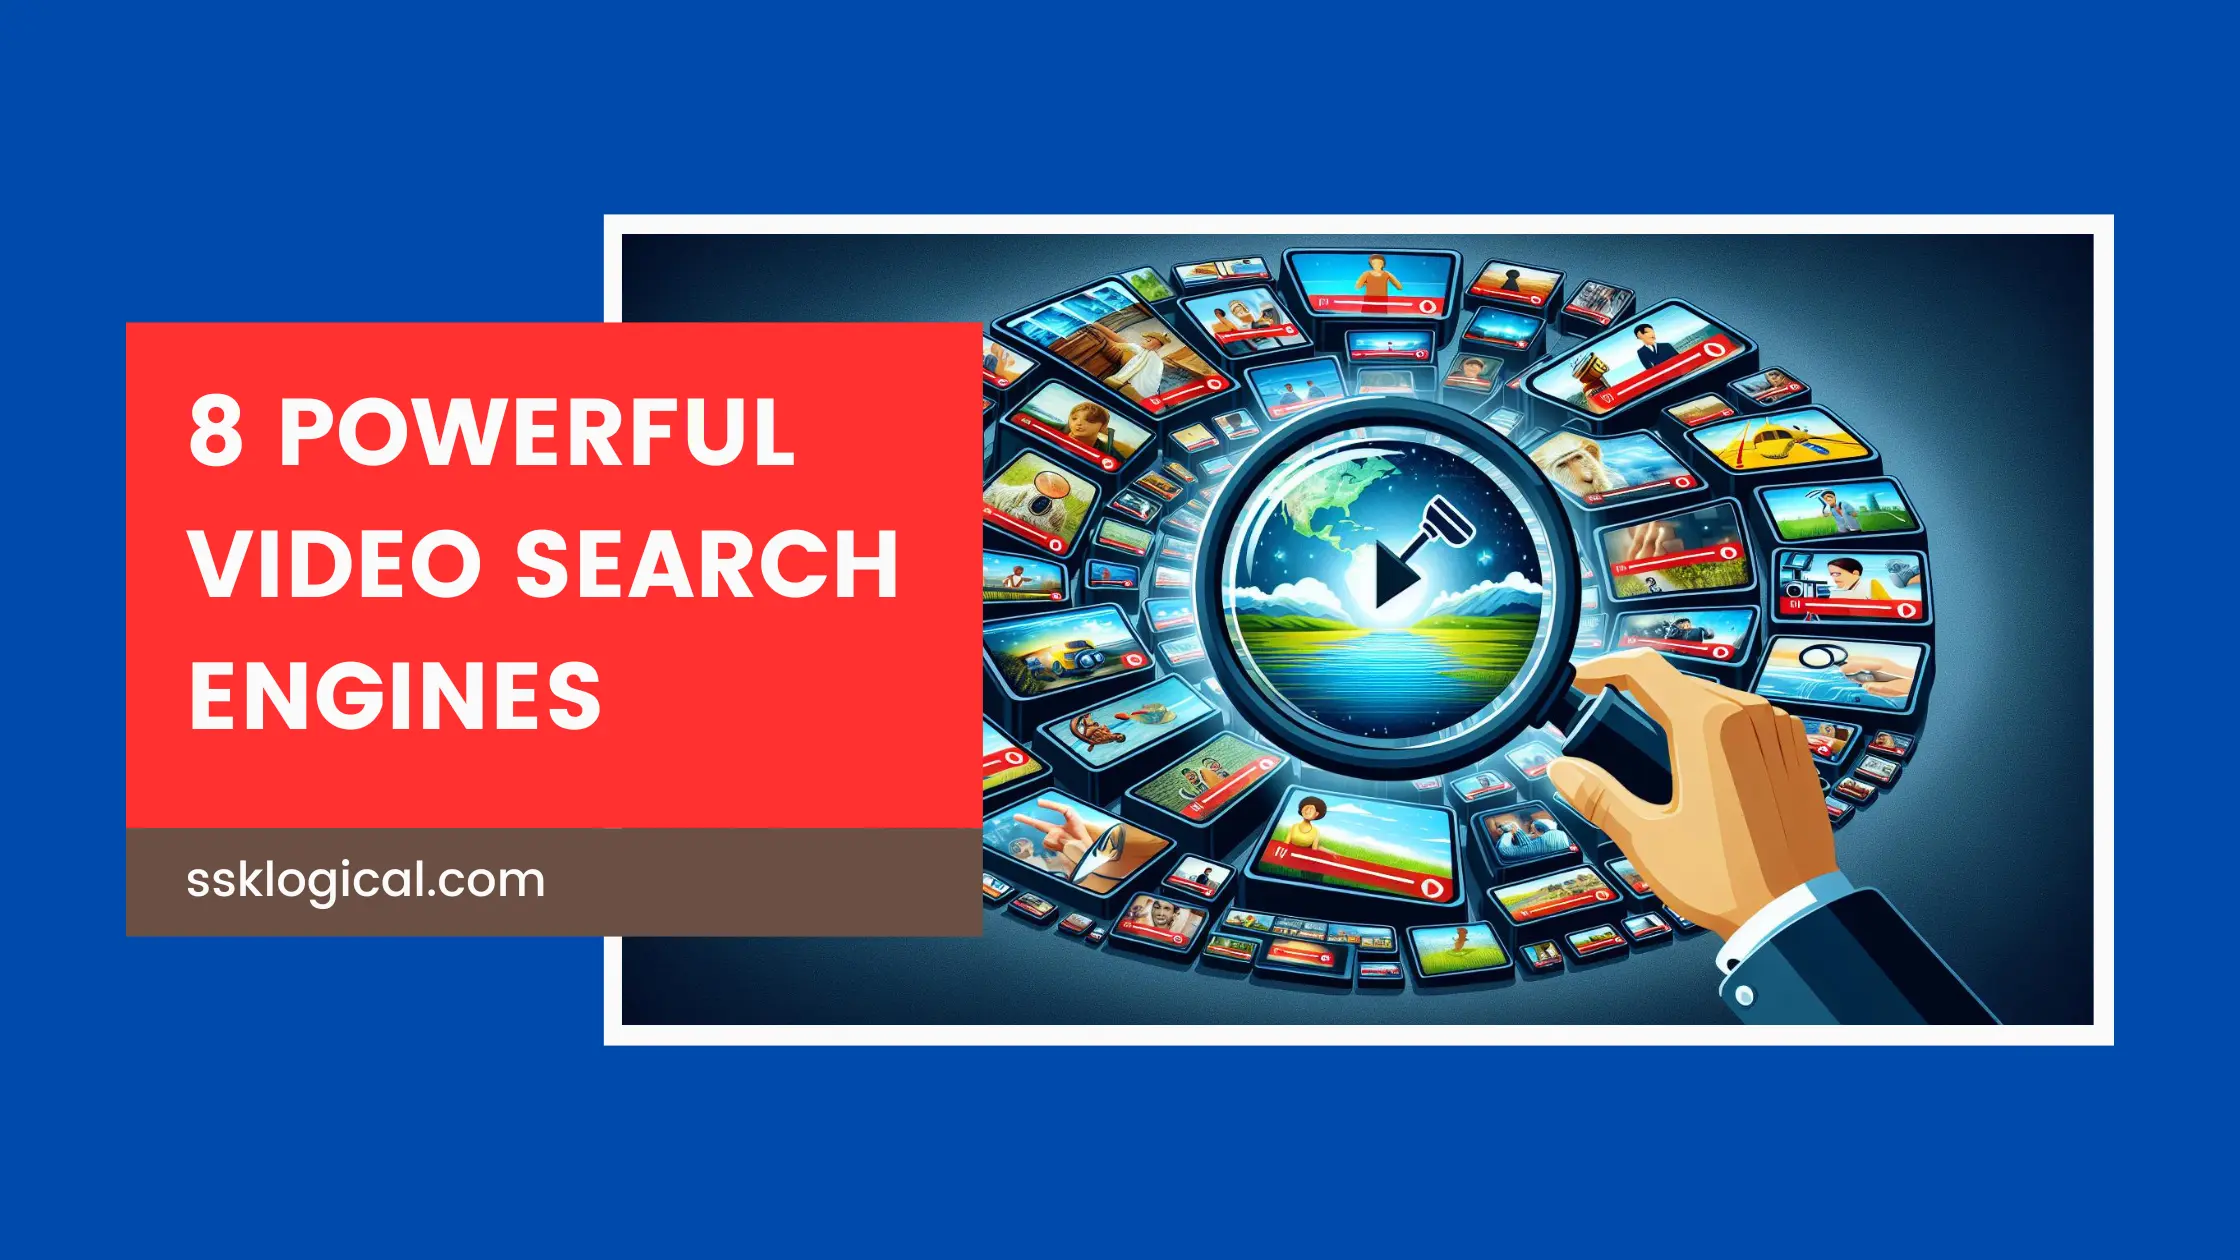 video search engine